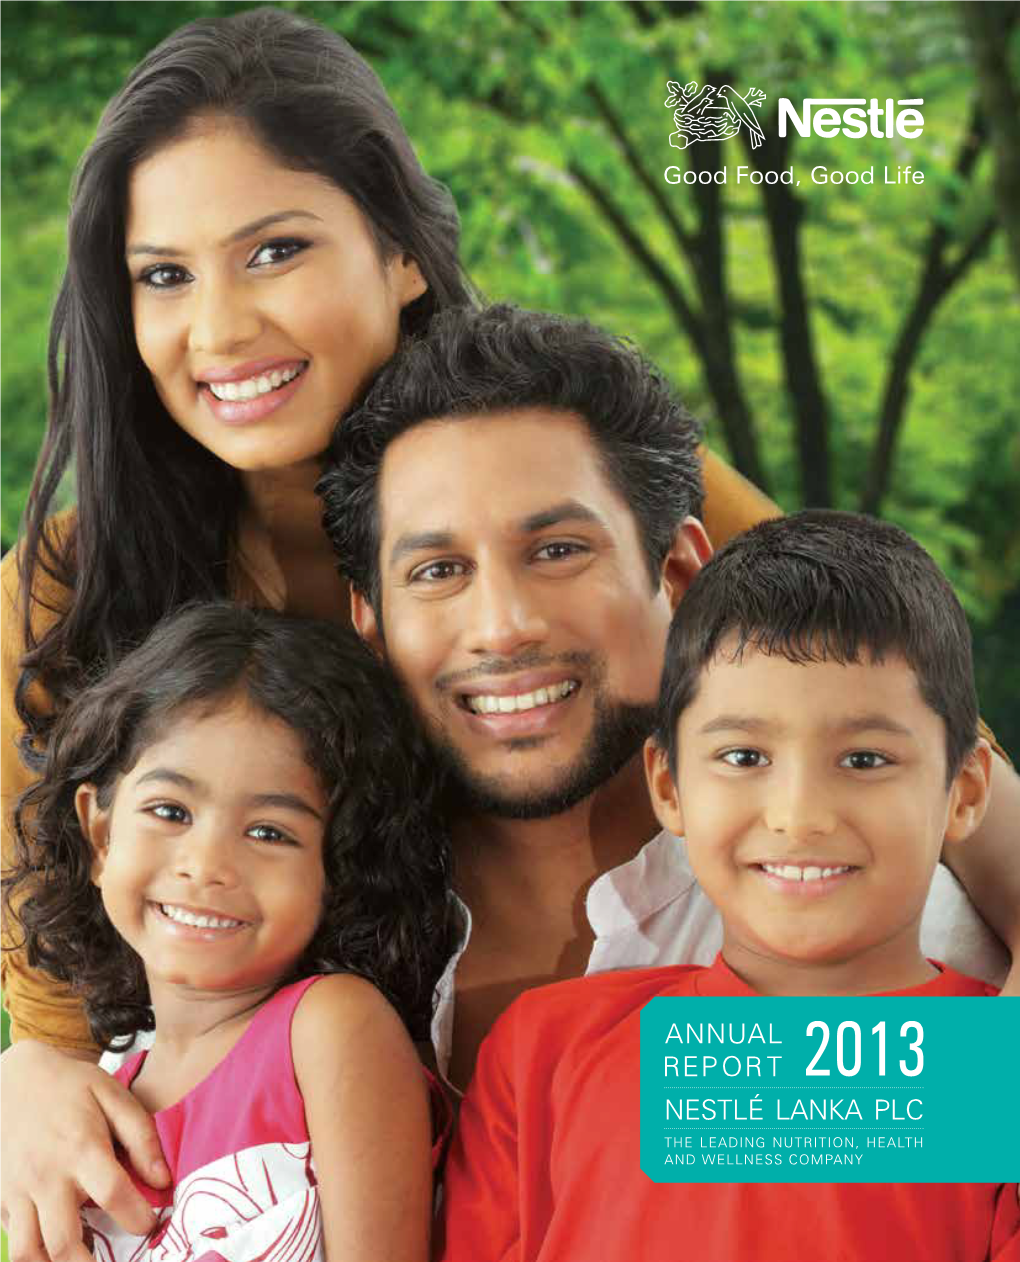 NESTLÉ LANKA PLC the LEADING NUTRITION, HEALTH and WELLNESS COMPANY Table of Contents